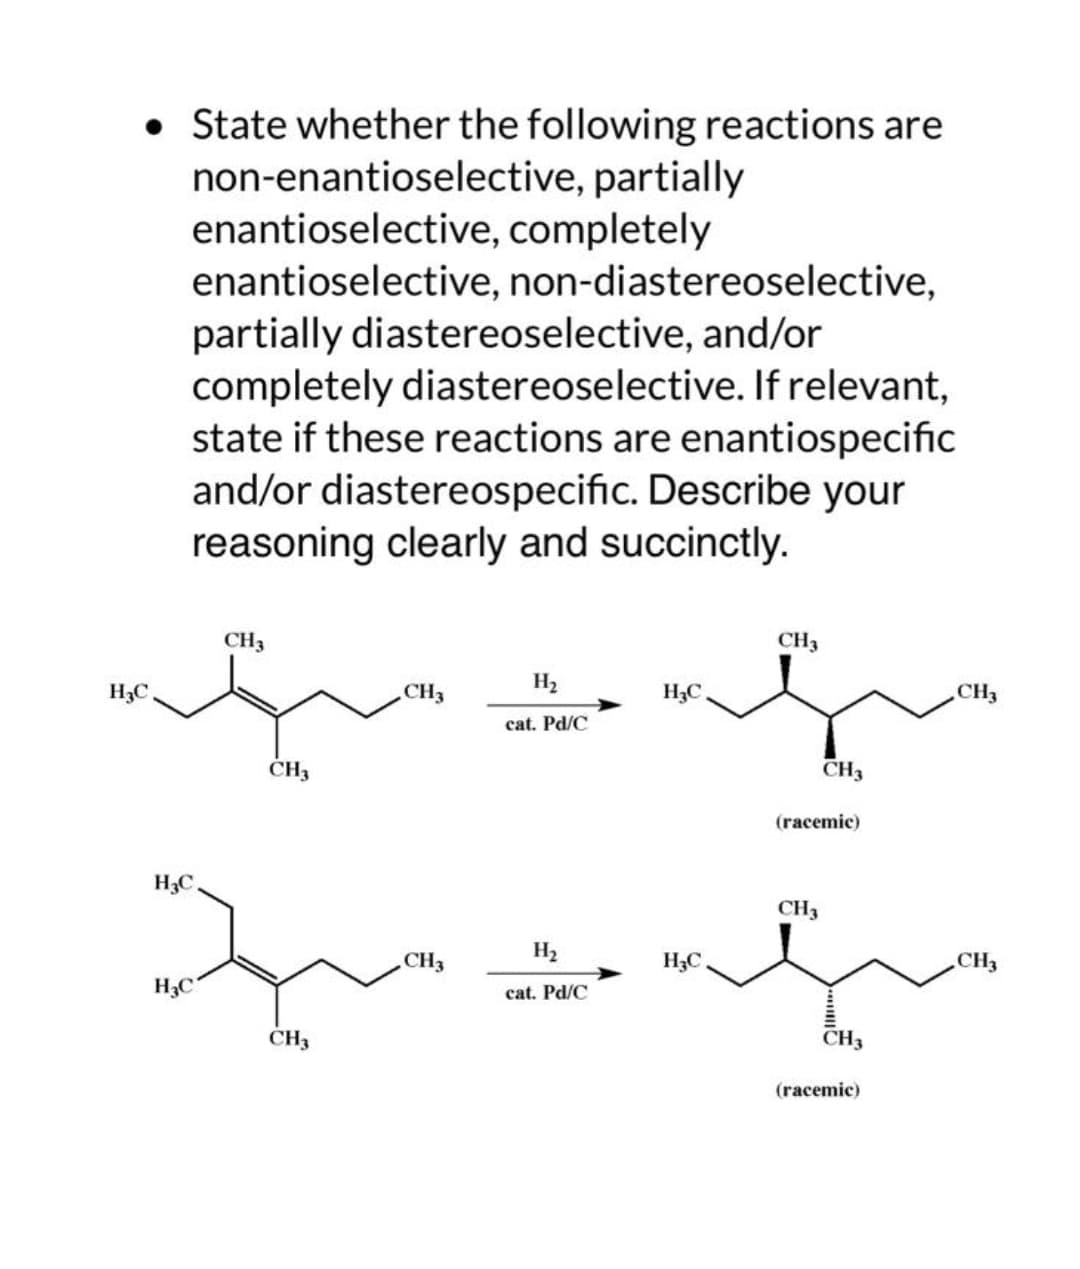 • State whether the following reactions are
non-enantioselective, partially
enantioselective, completely
enantioselective, non-diastereoselective,
partially diastereoselective, and/or
completely diastereoselective. If relevant,
state if these reactions are enantiospecific
and/or diastereospecific. Describe your
reasoning clearly and succinctly.
H₂C
CH3
CH3
CH3
H3C
qu
H₂C
CH3
CH3
H₂
cat. Pd/C
H₂
cat. Pd/C
H₂C
H₂C.
CH3
CH3
(racemic)
CH3
CH3
(racemic)
CH3
CH3